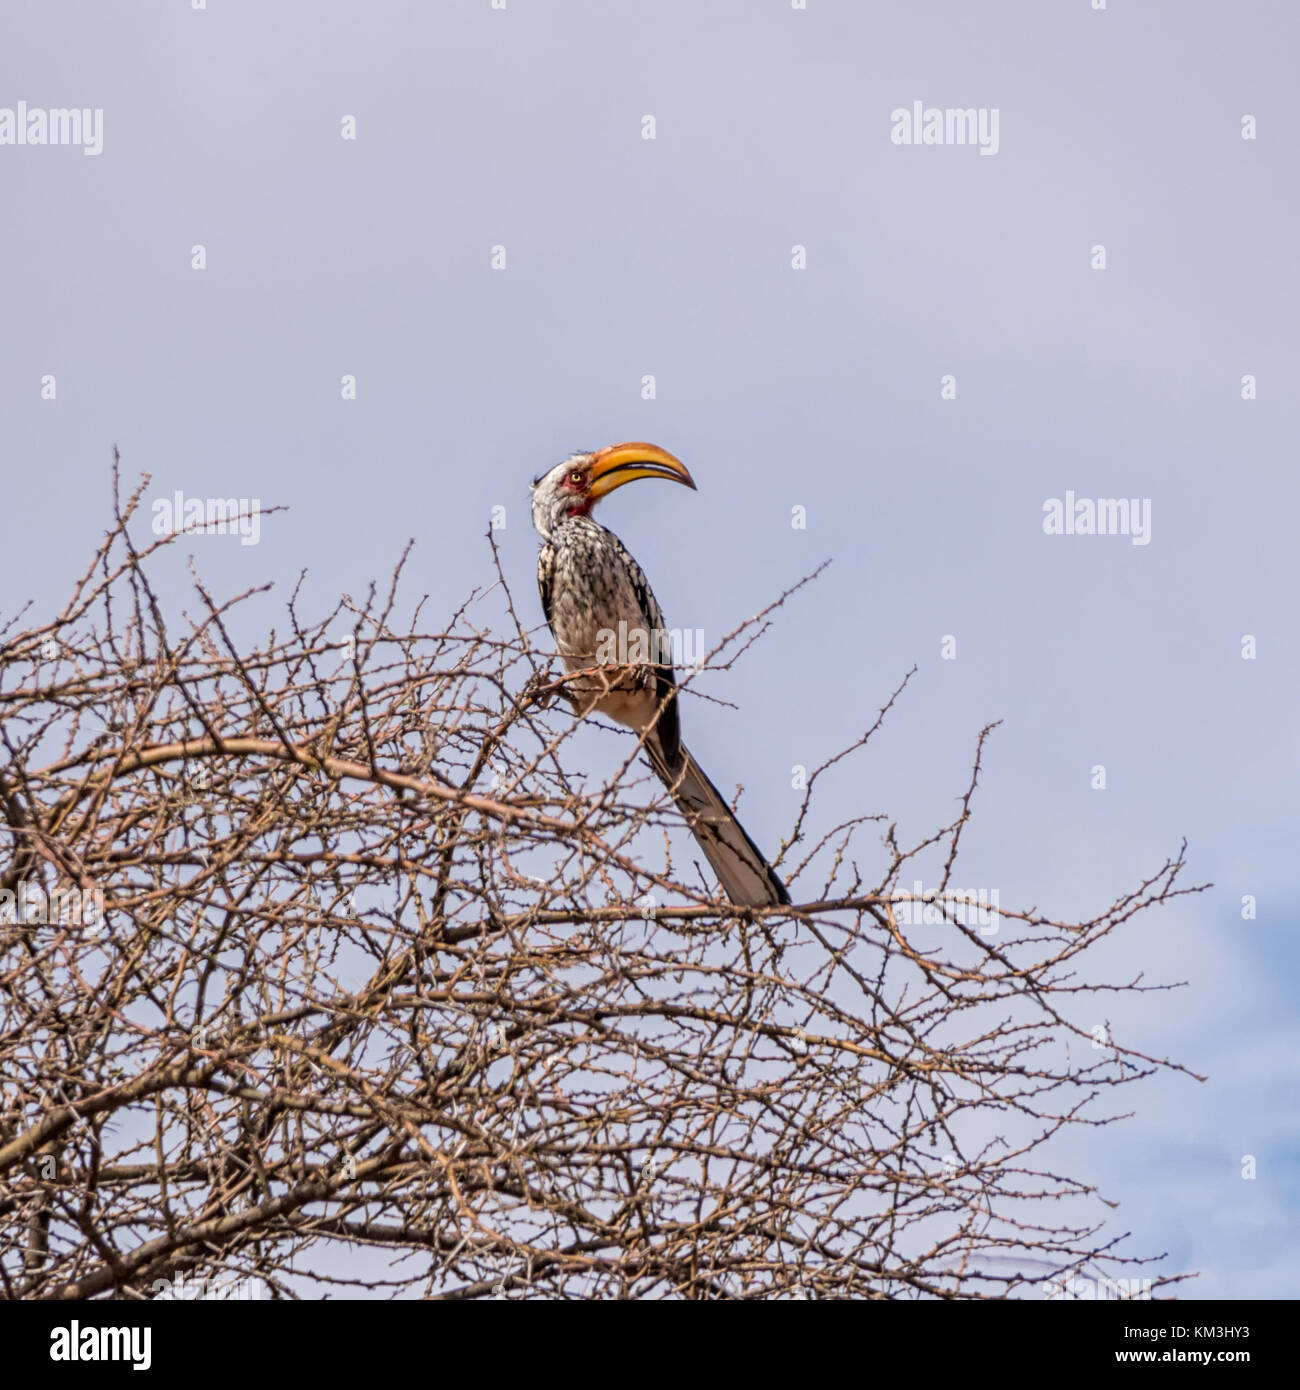 A Yellow-billed Hornbill perched in a tree in Southern African savanna Stock Photo